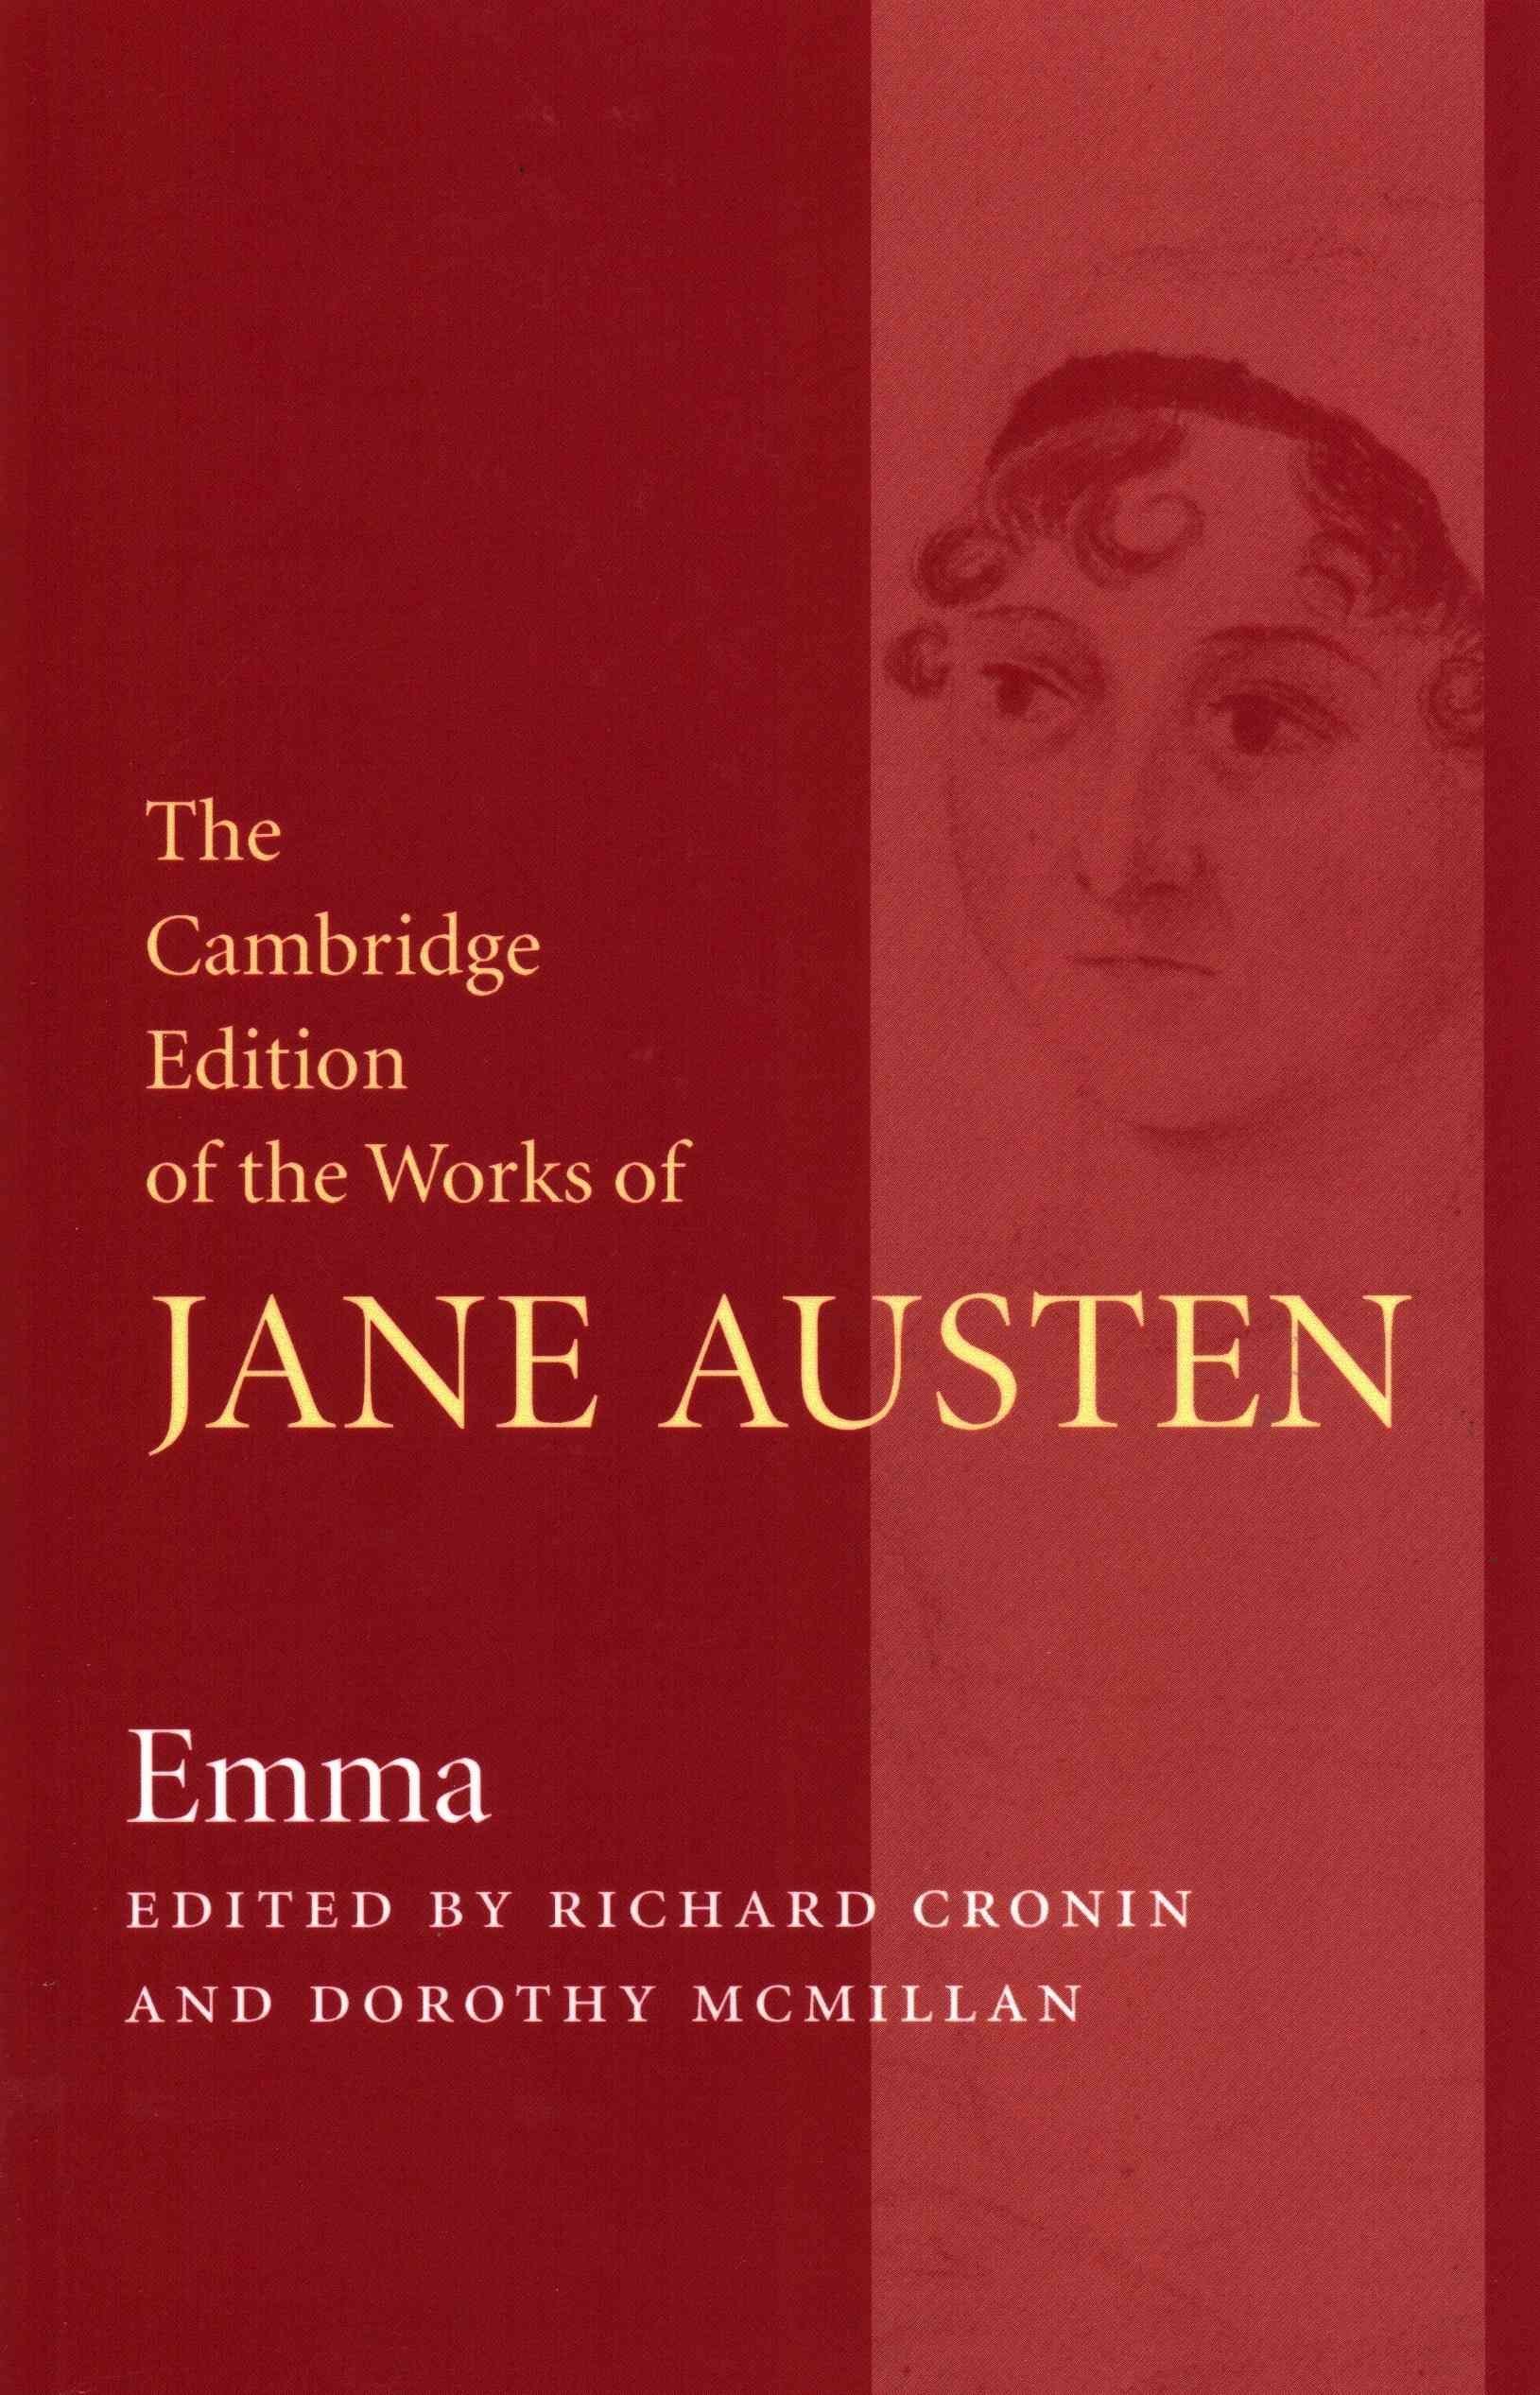 Free　Buy　Emma　by　With　Jane　Austen　Delivery